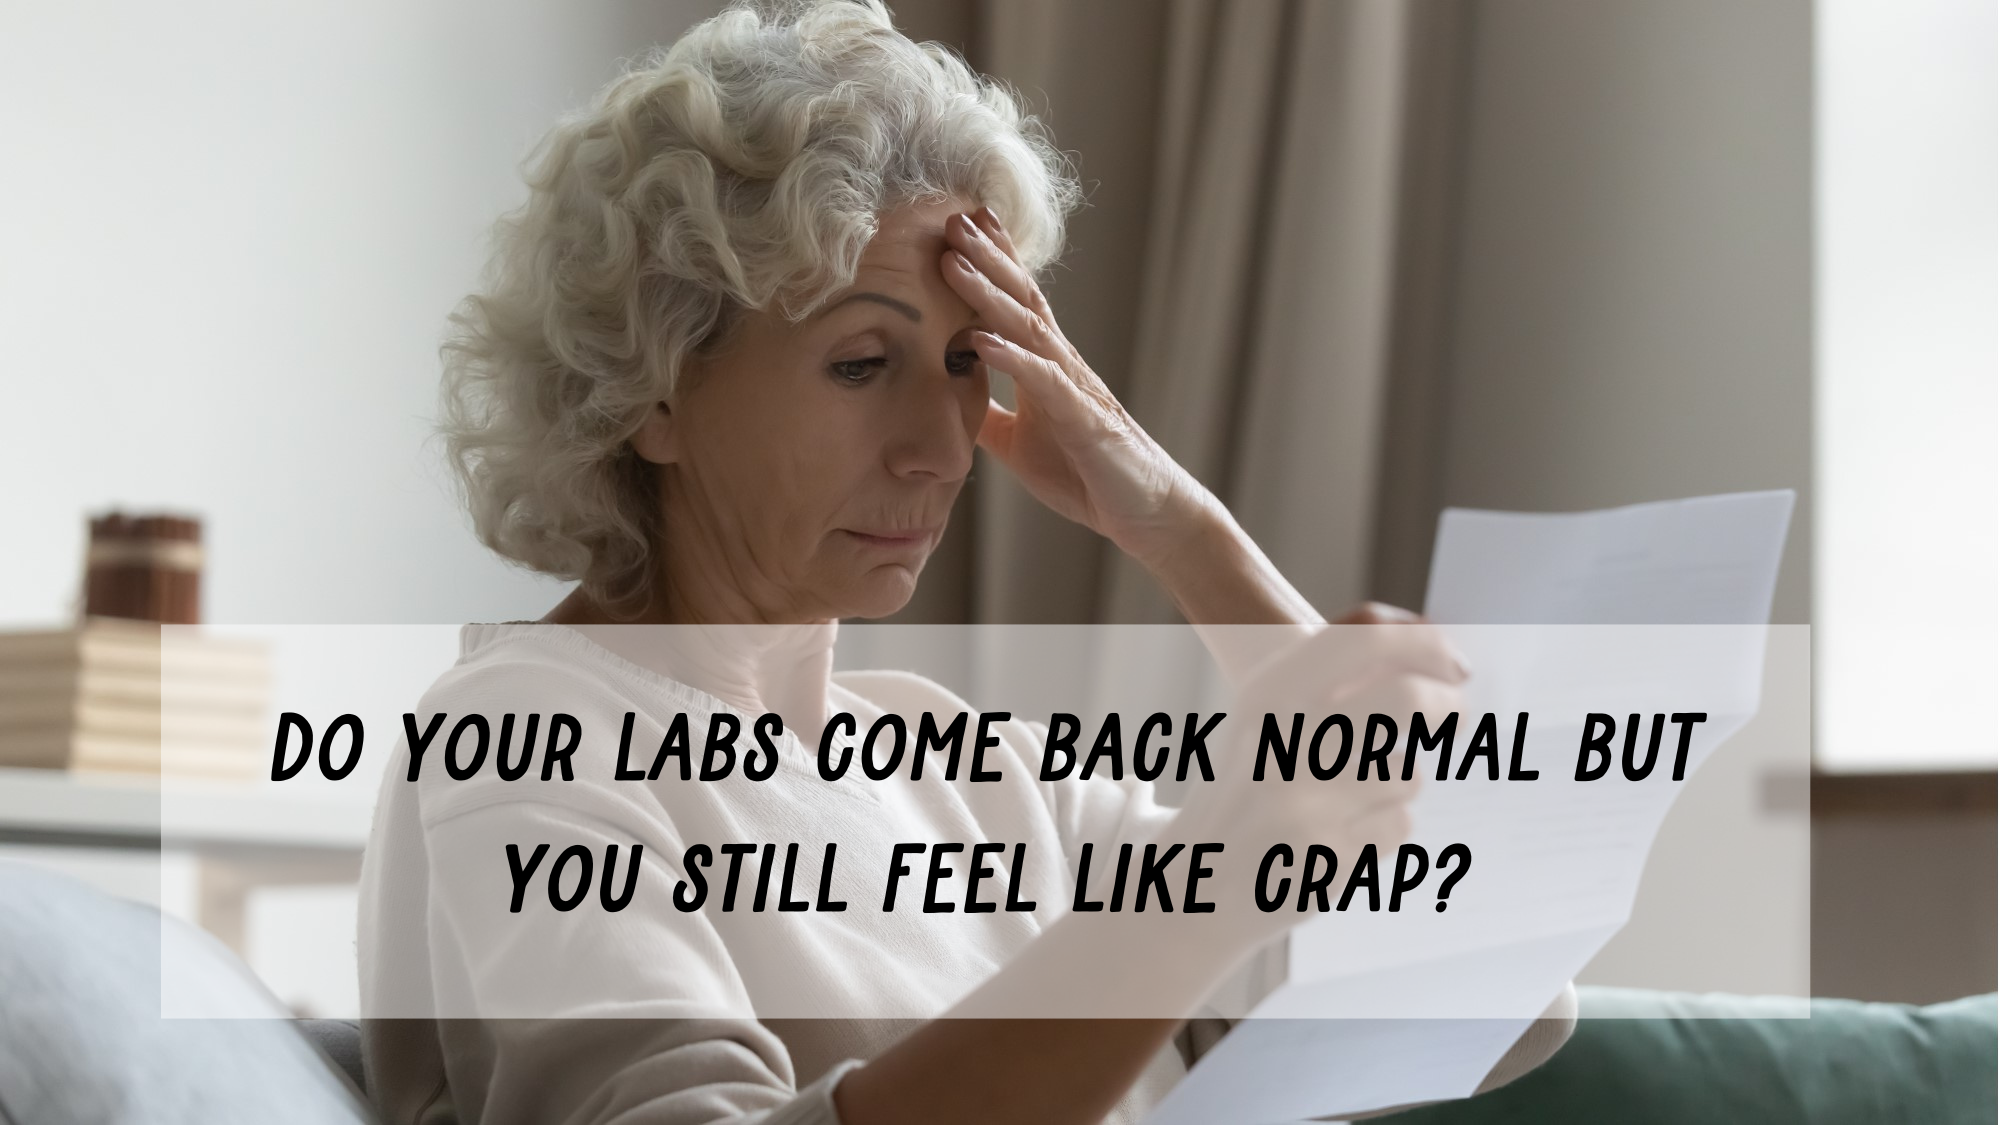 Abnormal labs